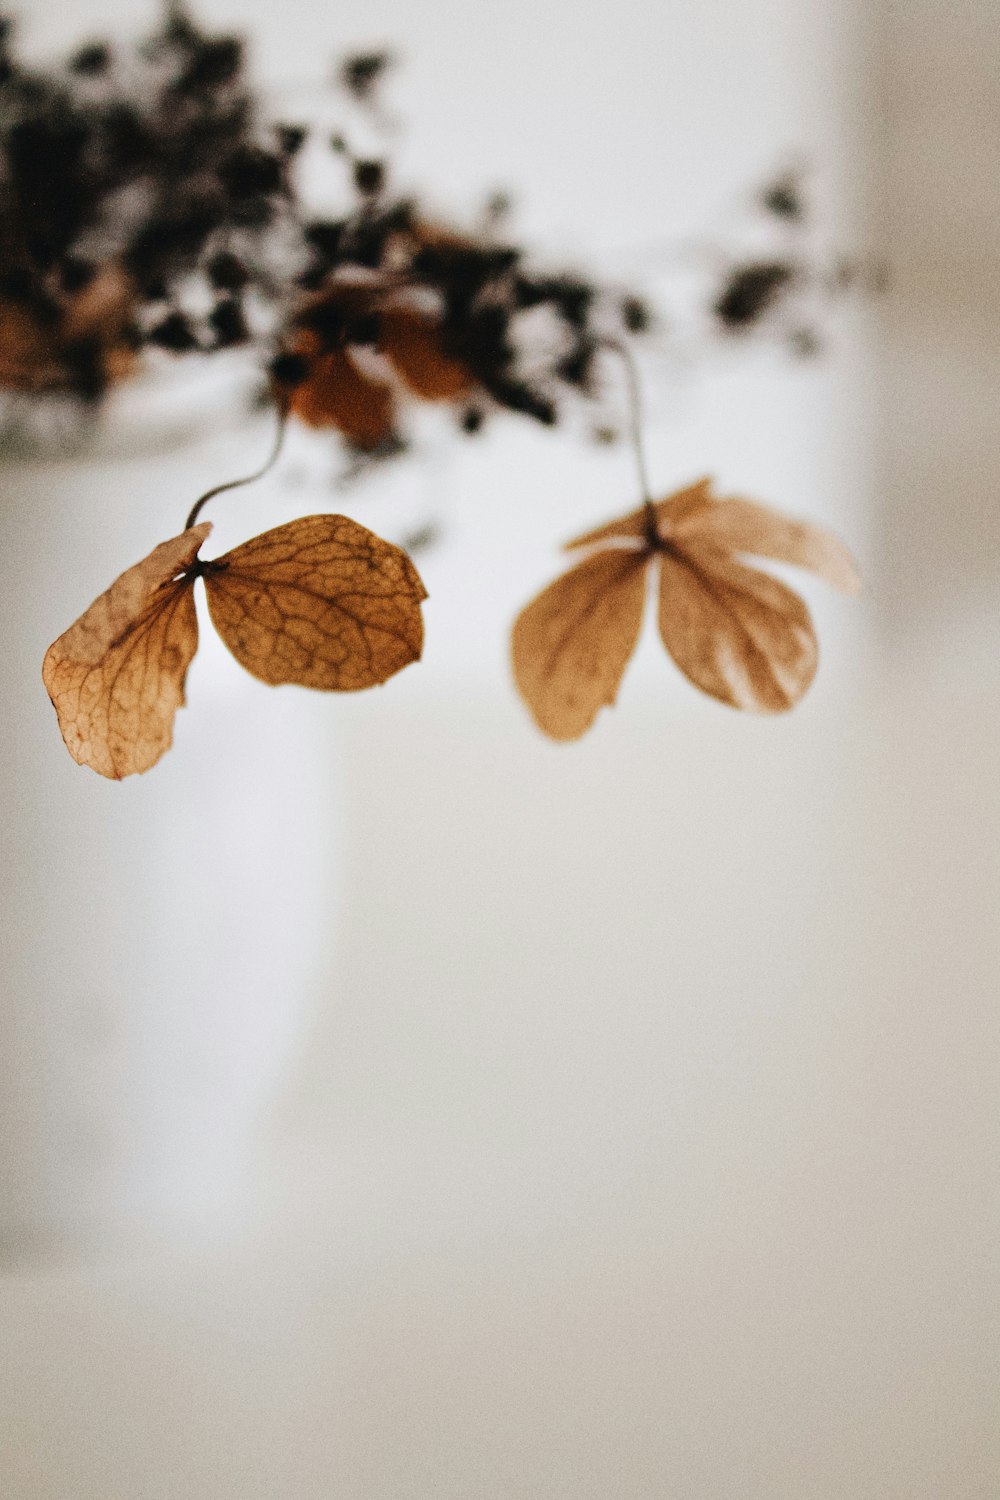 dried leaves hang from a branch in a vase